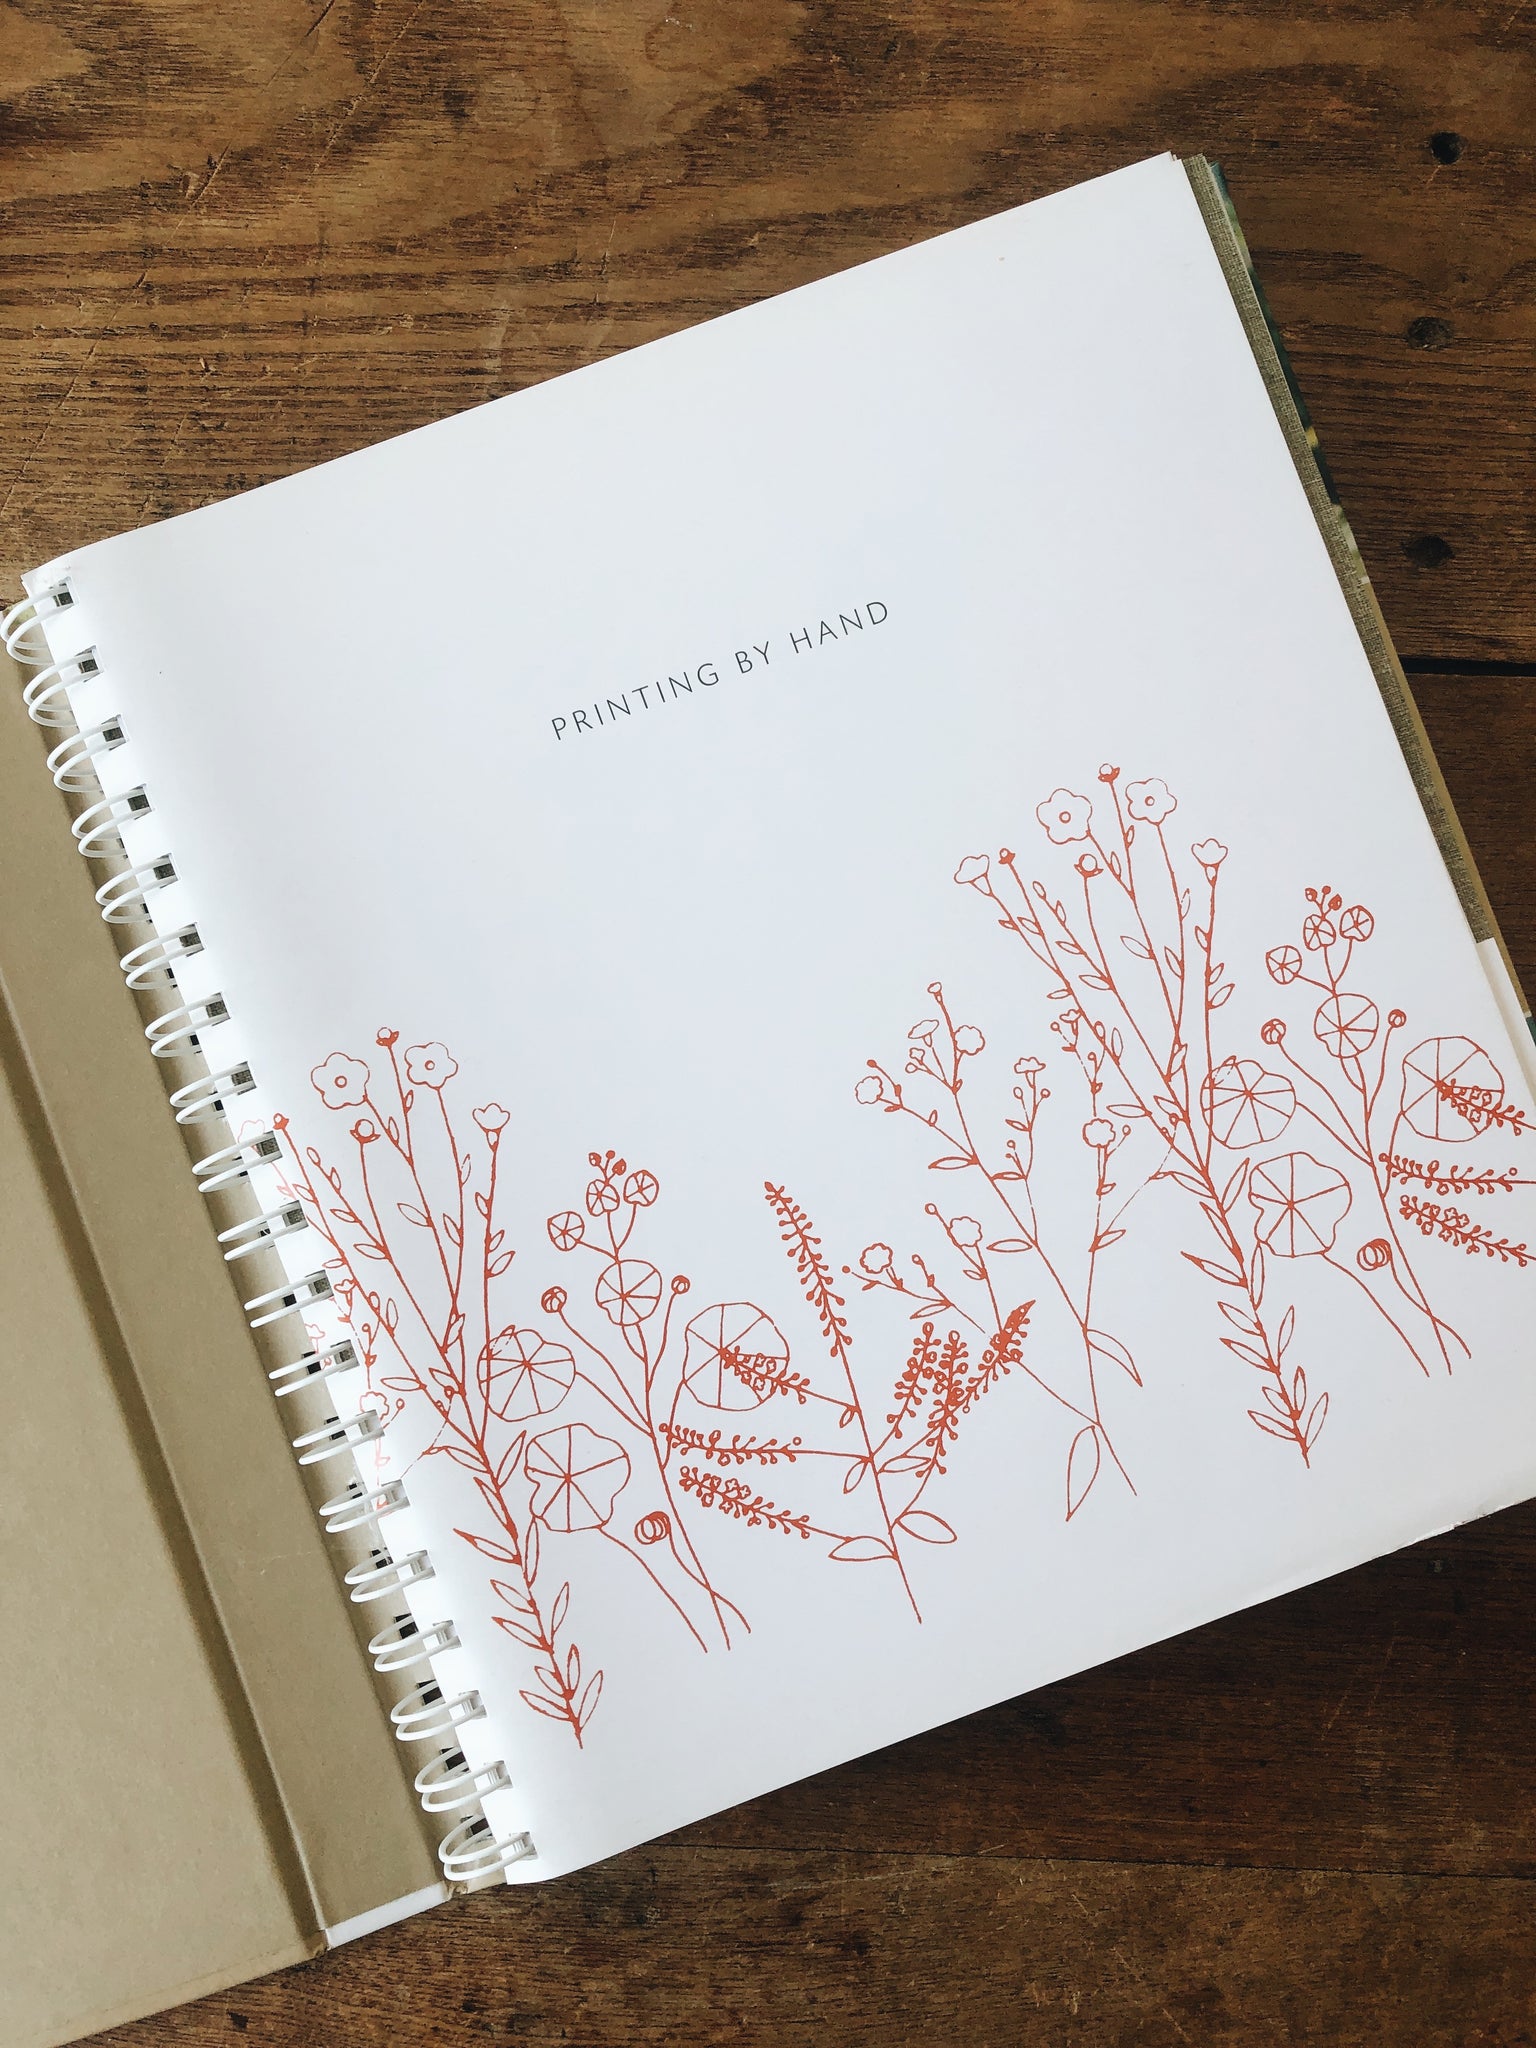 Printing By Hand Book